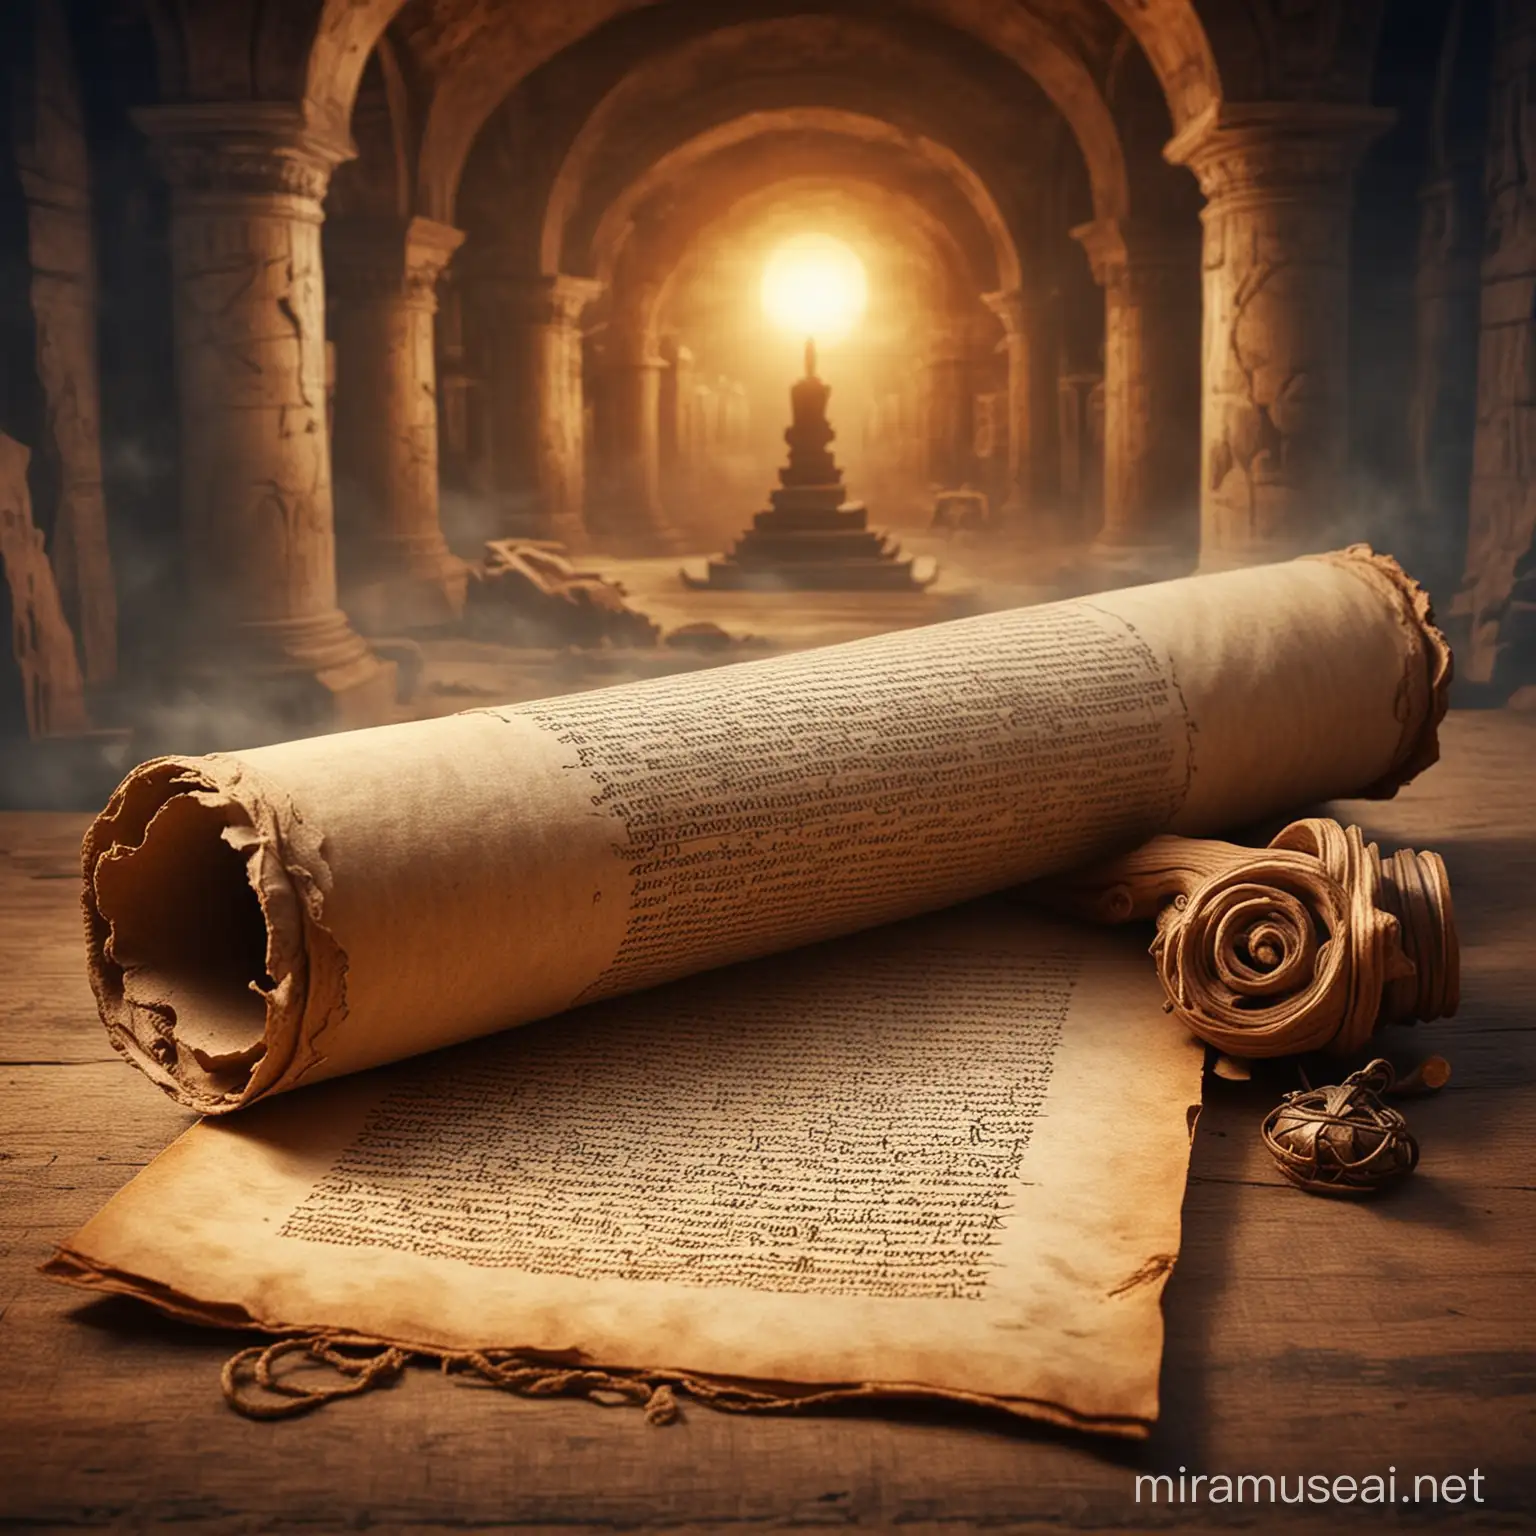 Enchanted Scroll Unfurled in Serene Ancient Setting